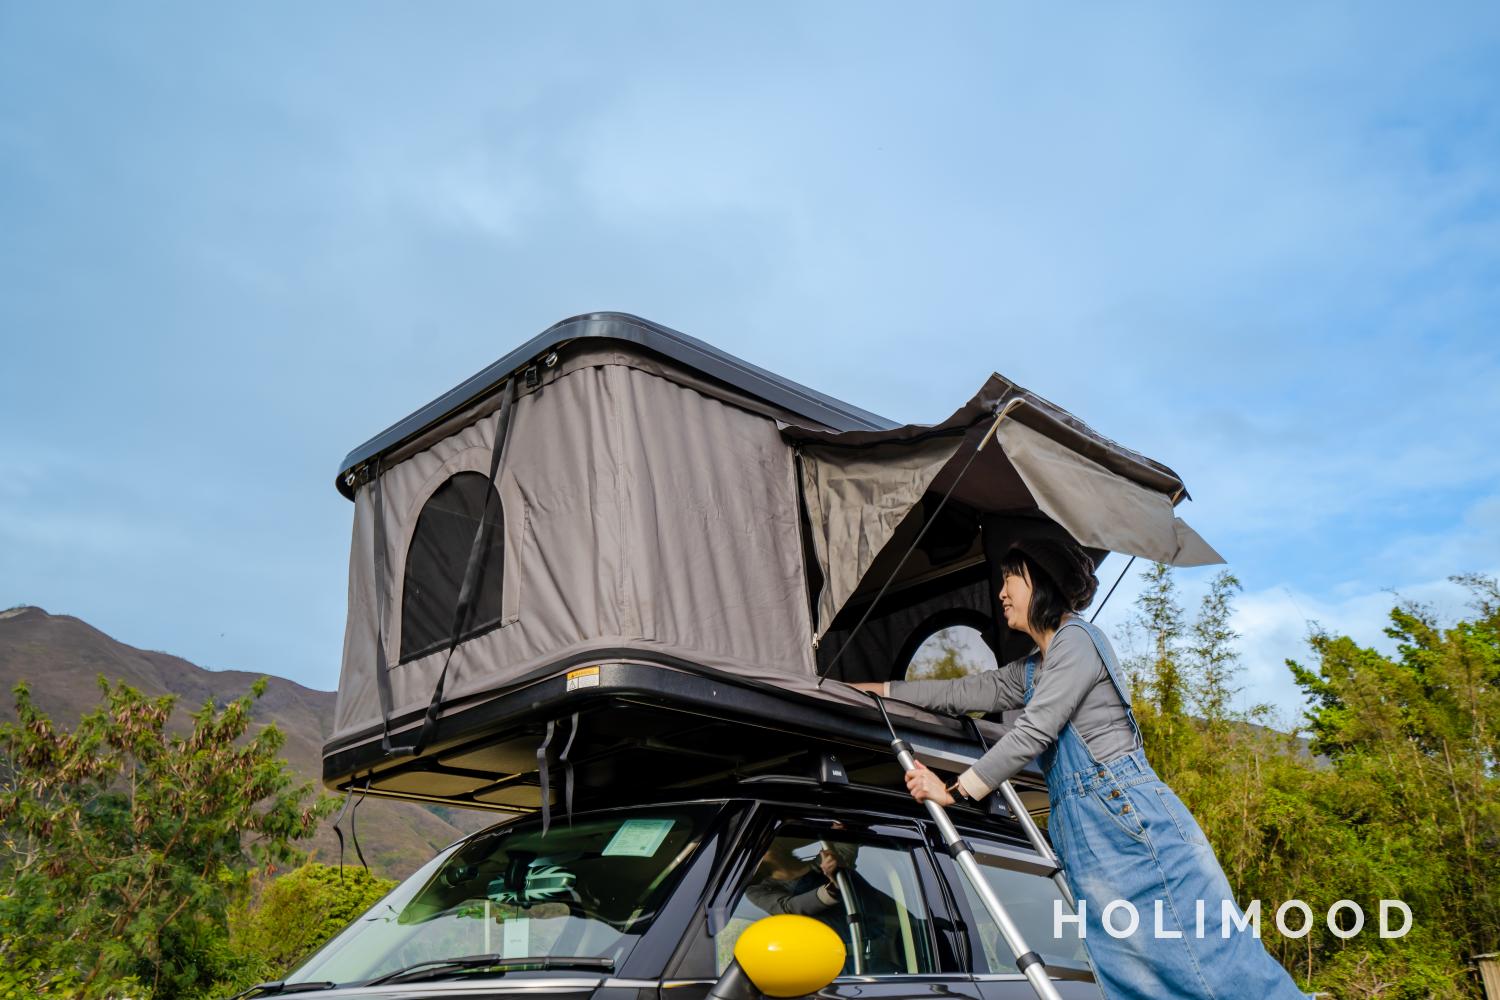 DNA 租車 【Girl Dream Car】Mini Cooper Countryman Roof Camping and Car Camping Experience 5